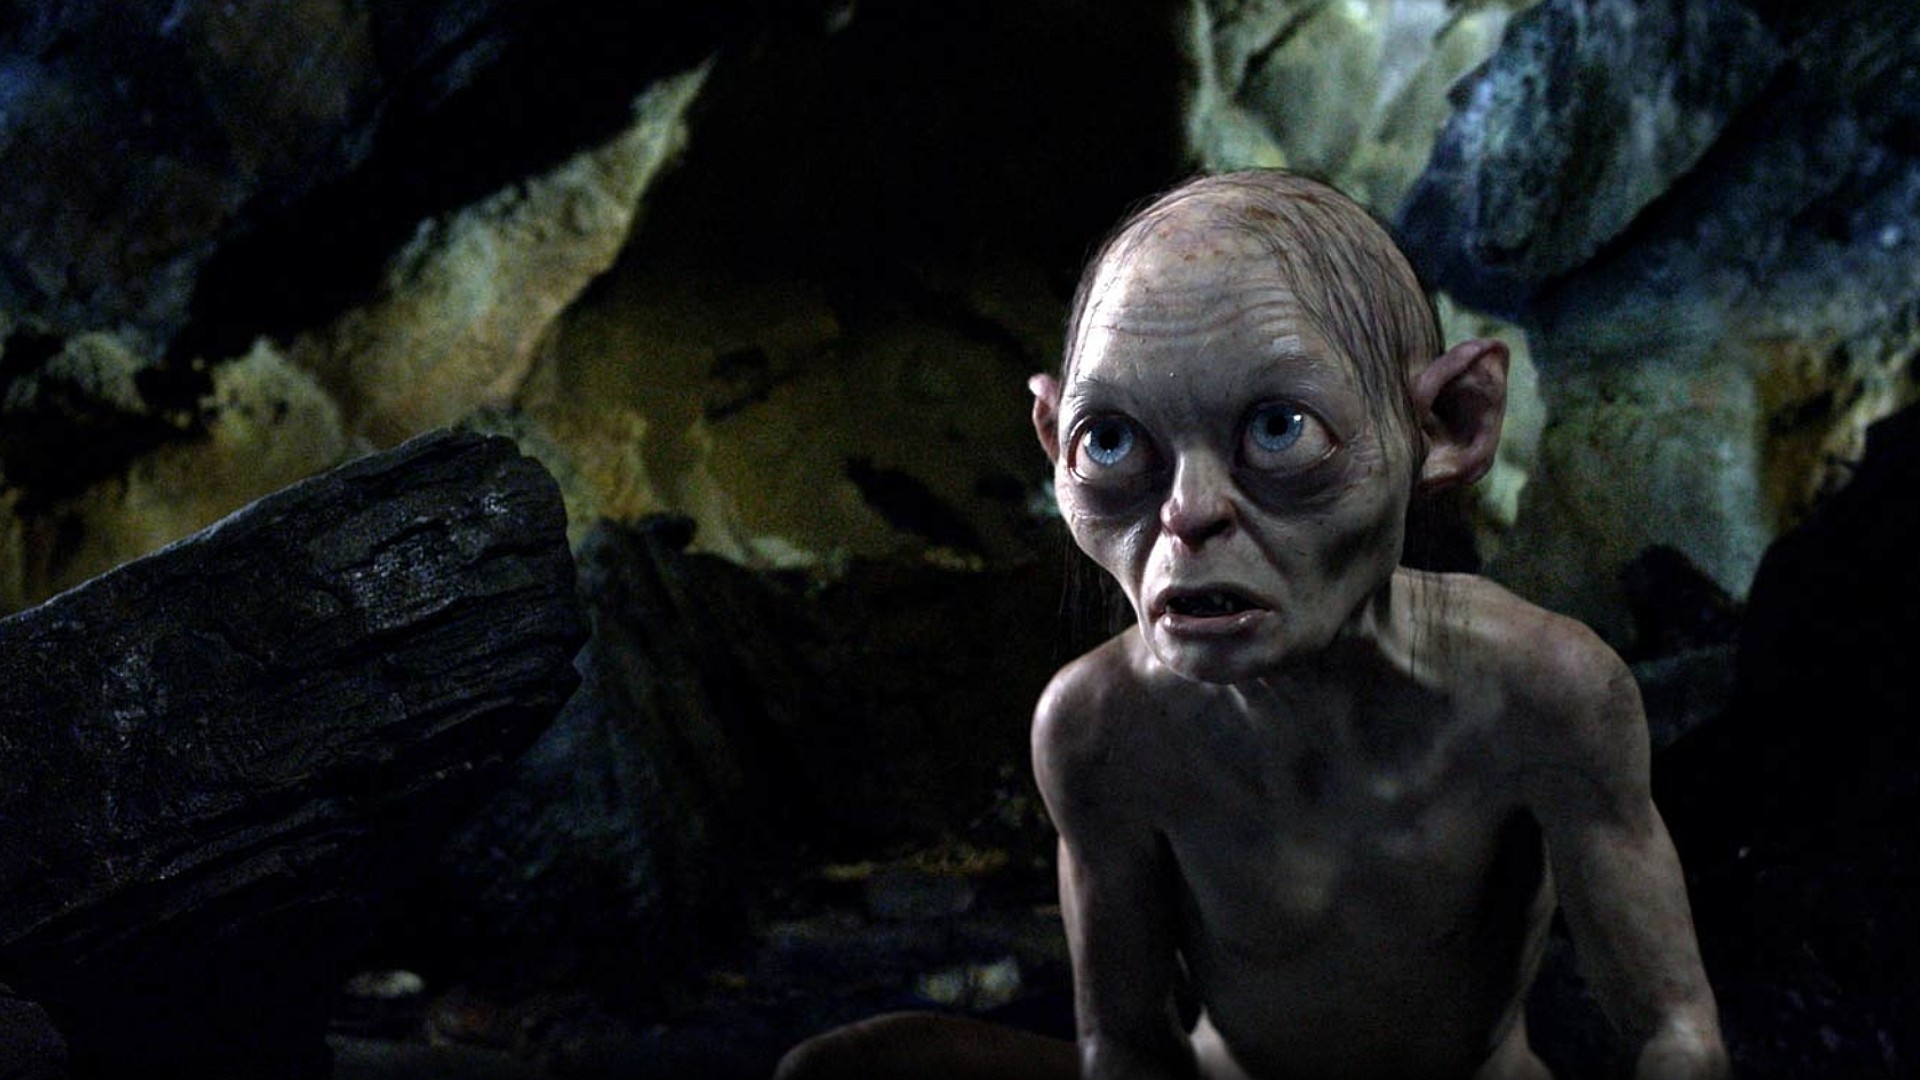 1920x1080 Lord of The Rings Gollum With Ring - wallpaper.